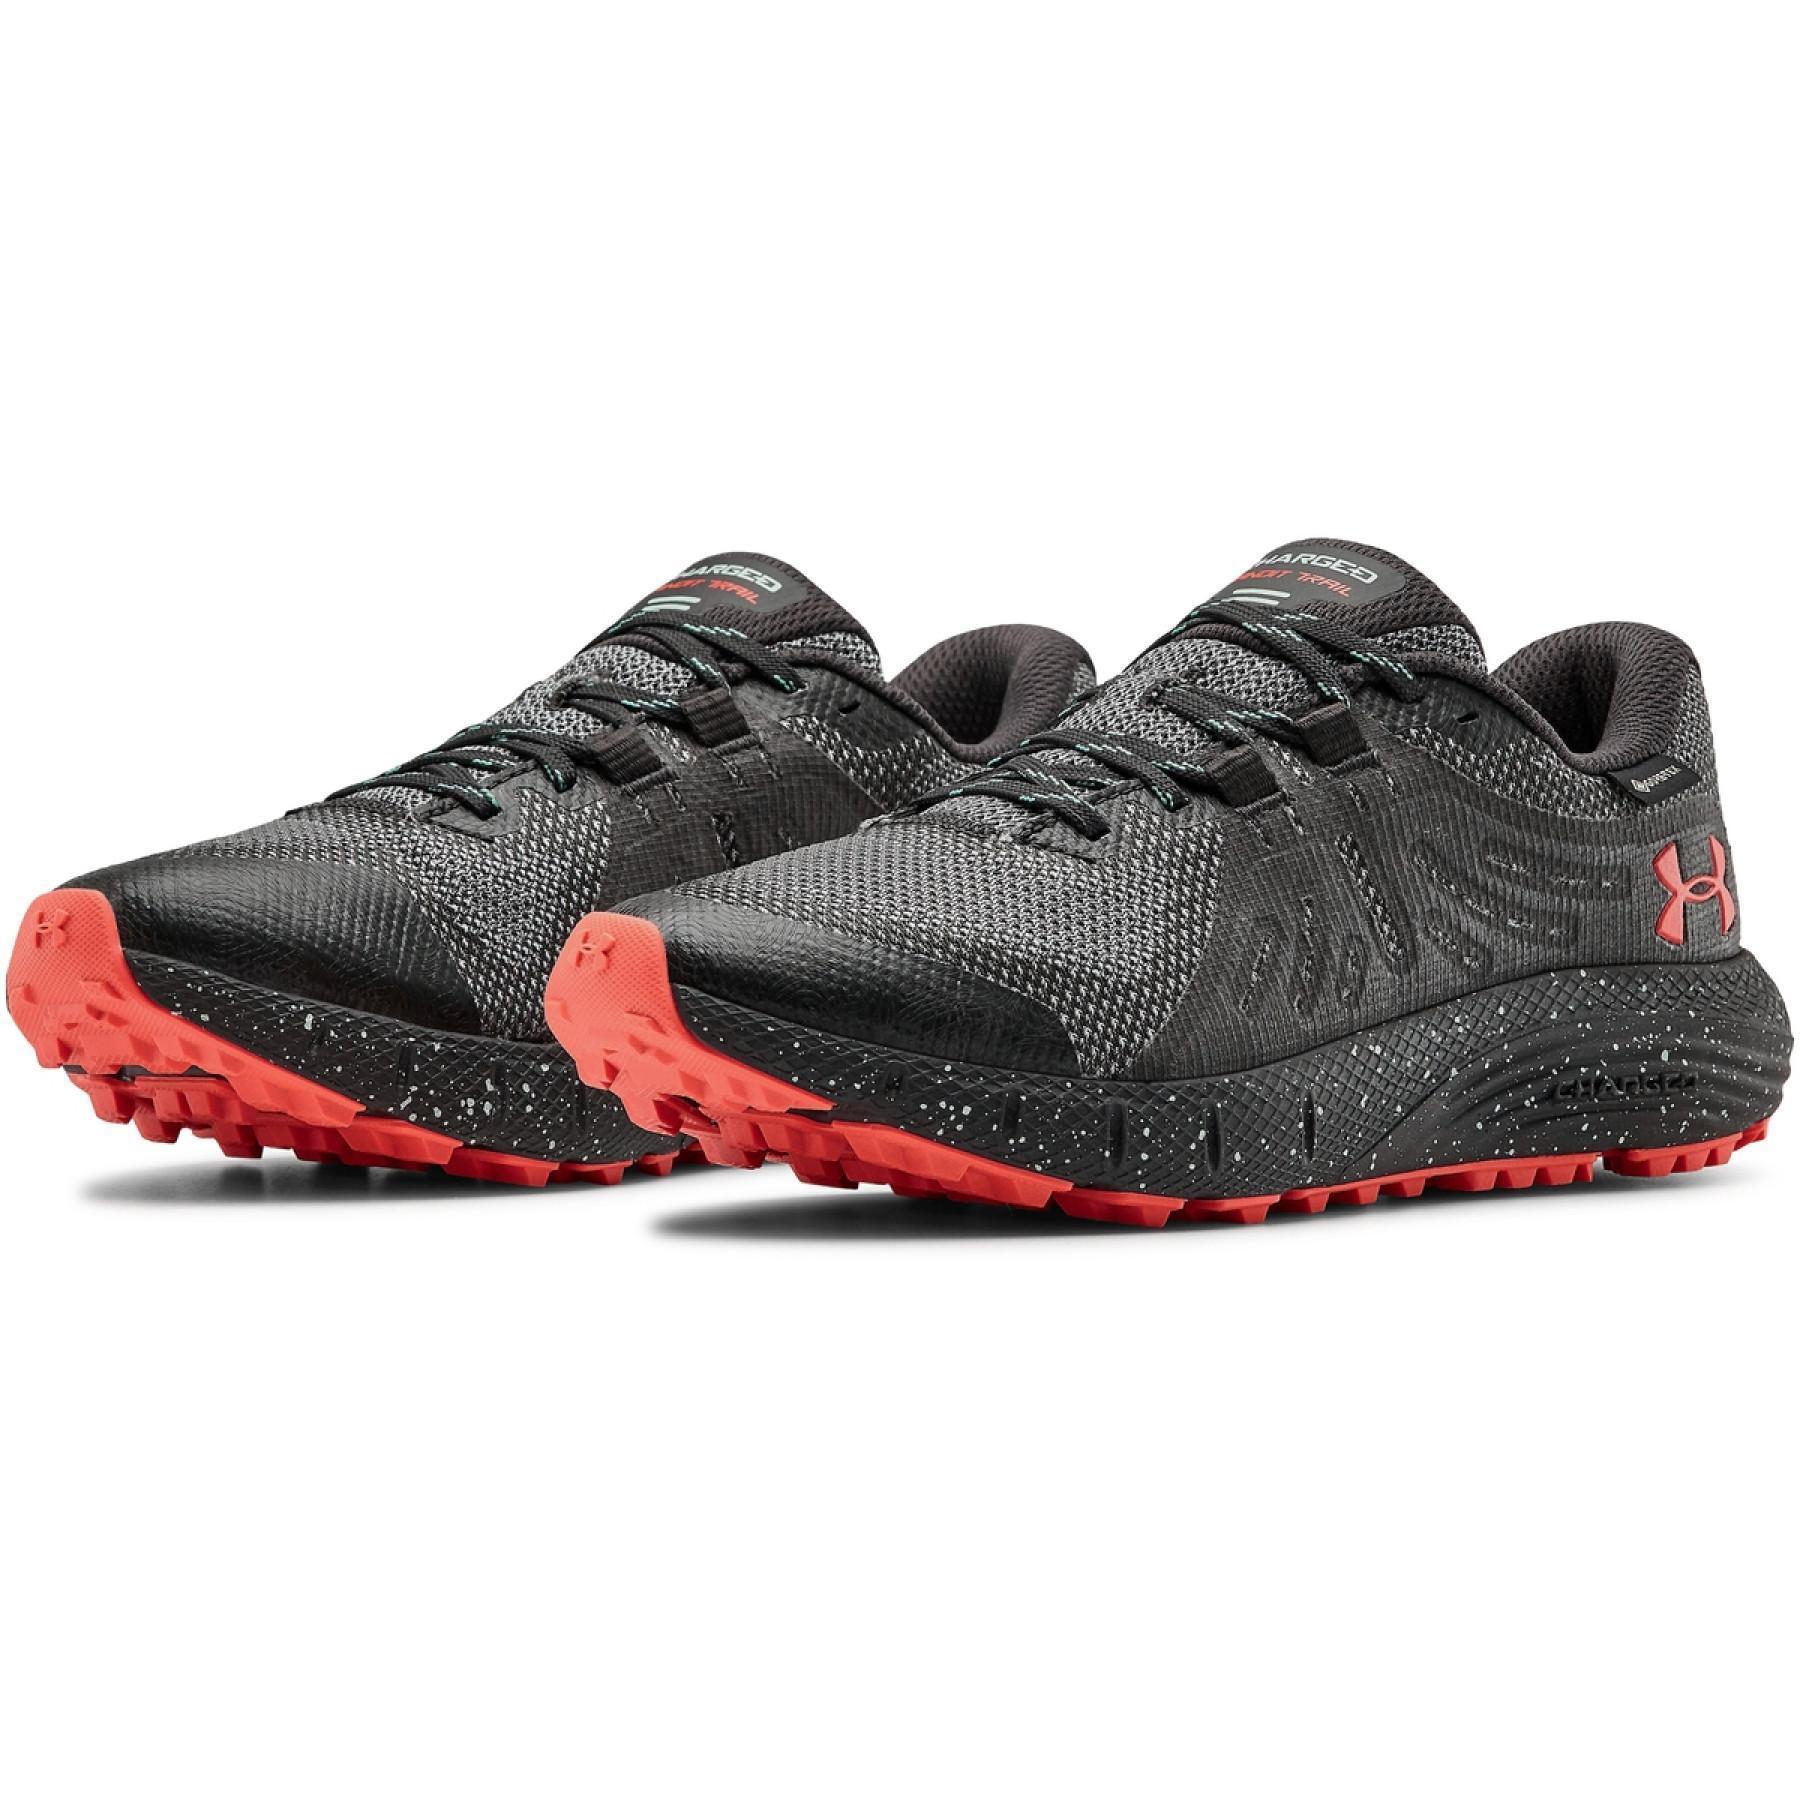 Chaussures de running femme Under Armour Charged Bandit Trail Gore-Tex